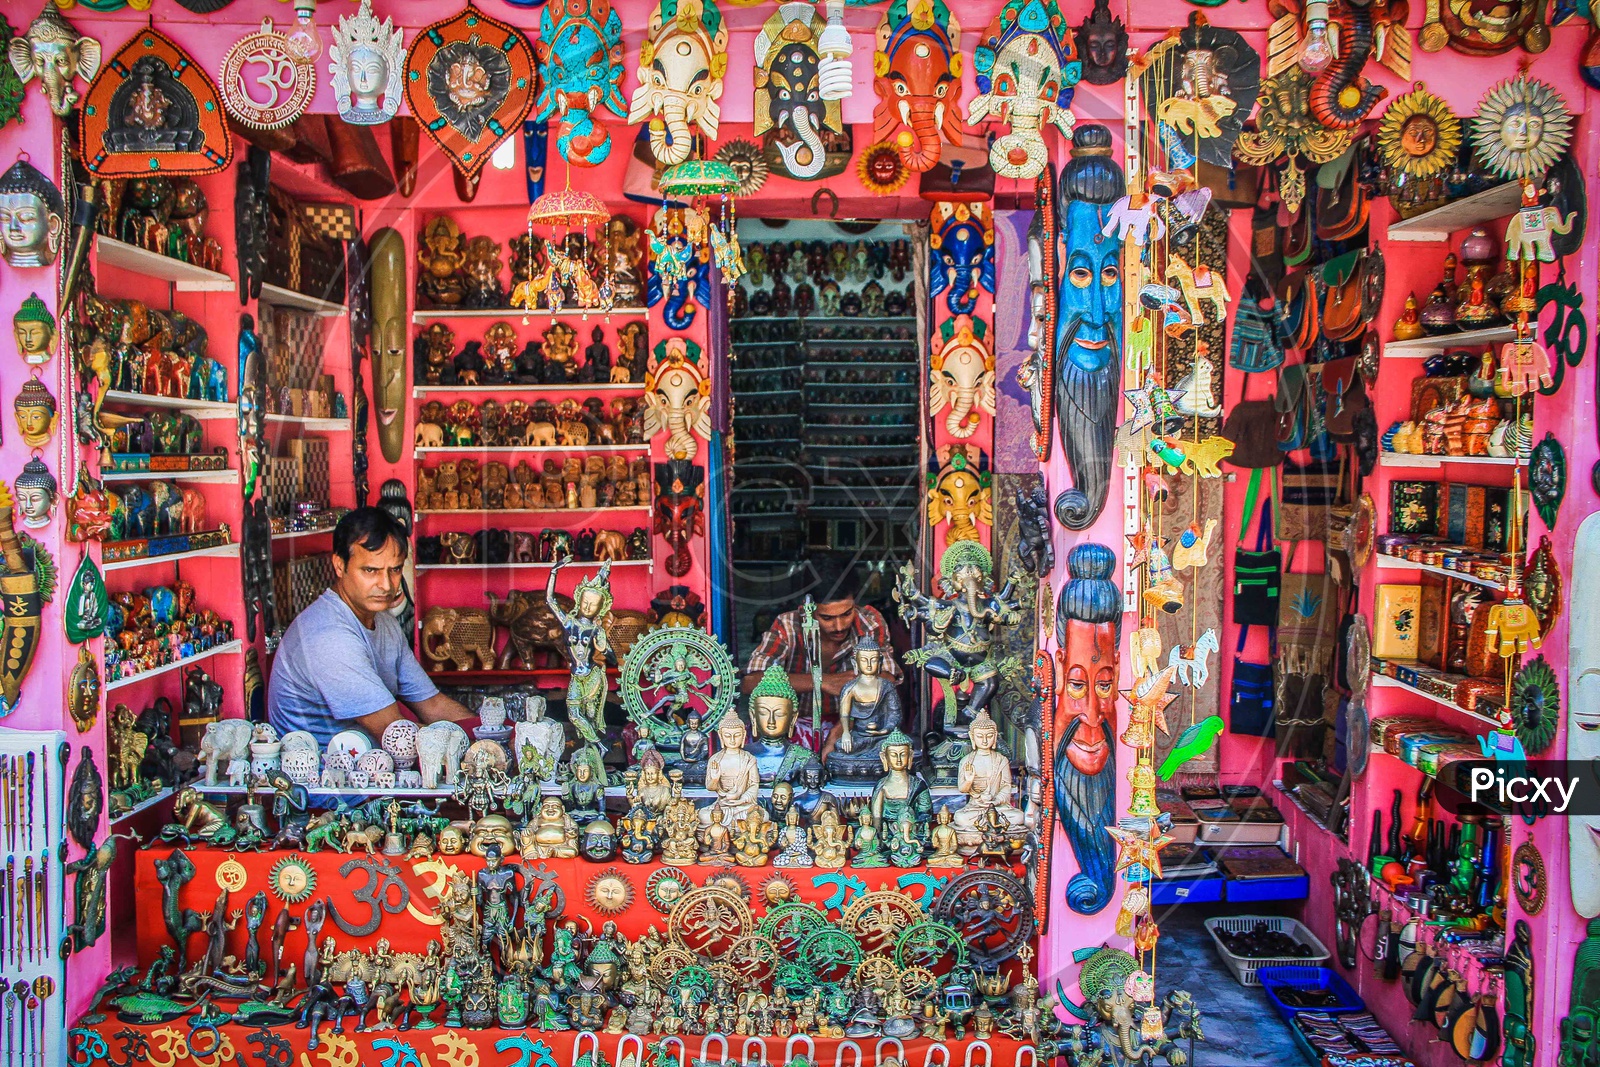 A shop with decorative items and a seller in it